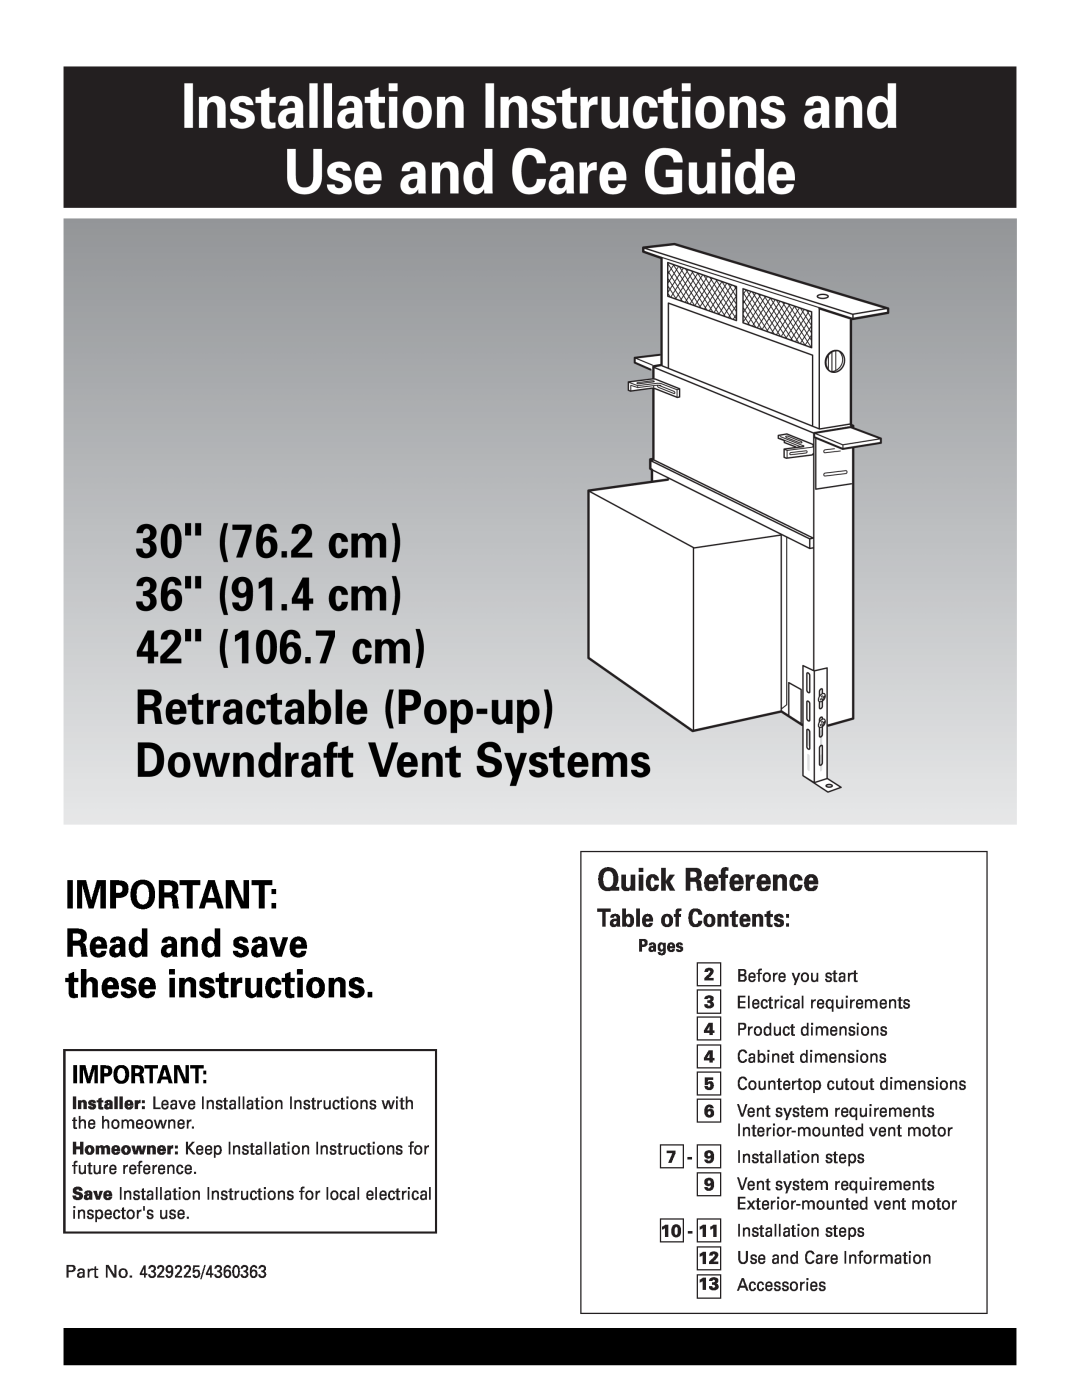 Whirlpool Vent system installation instructions Installation Instructions and Use and Care Guide, Quick Reference 